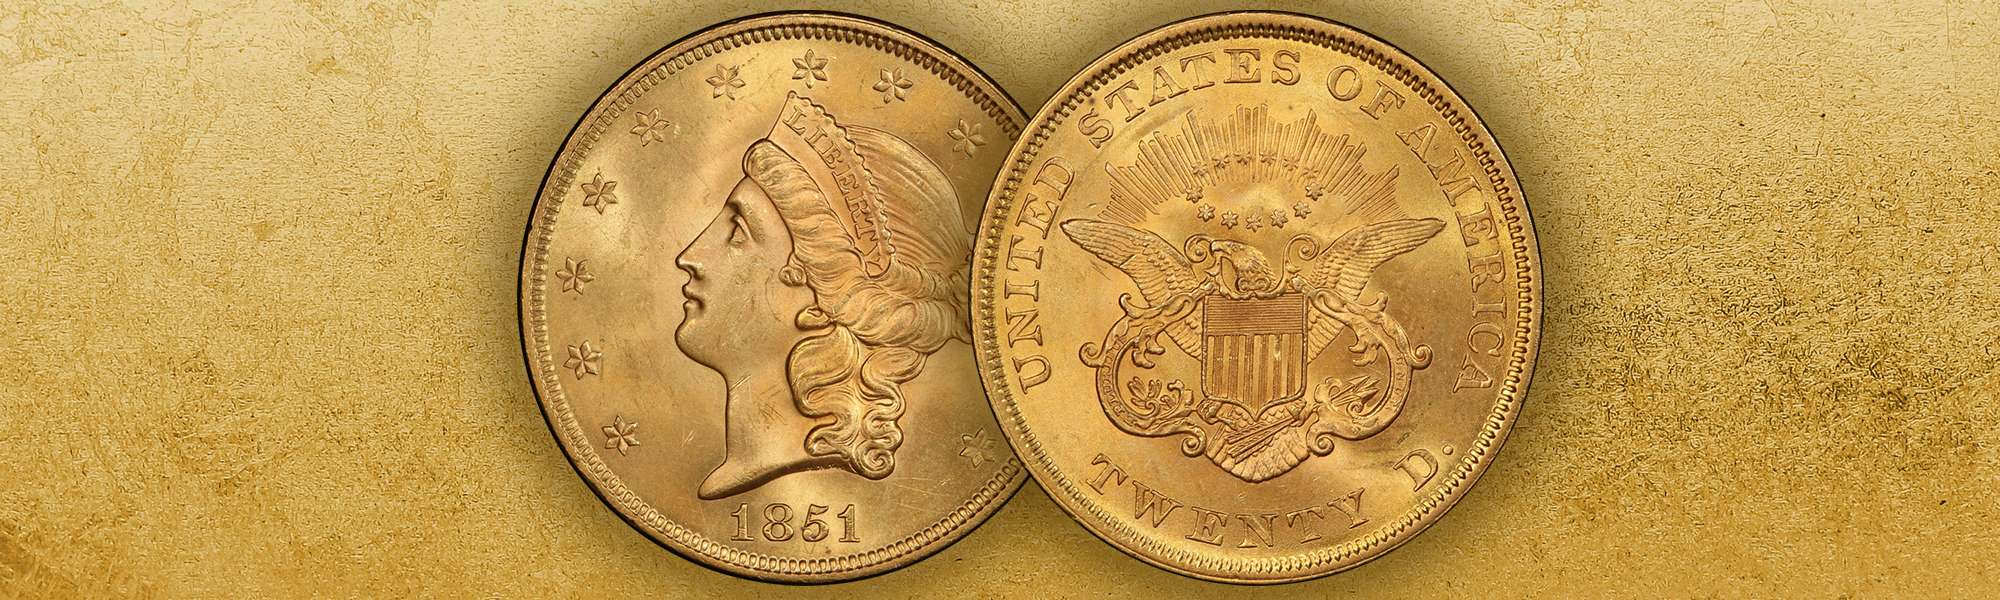 The History Behind Rare Coins